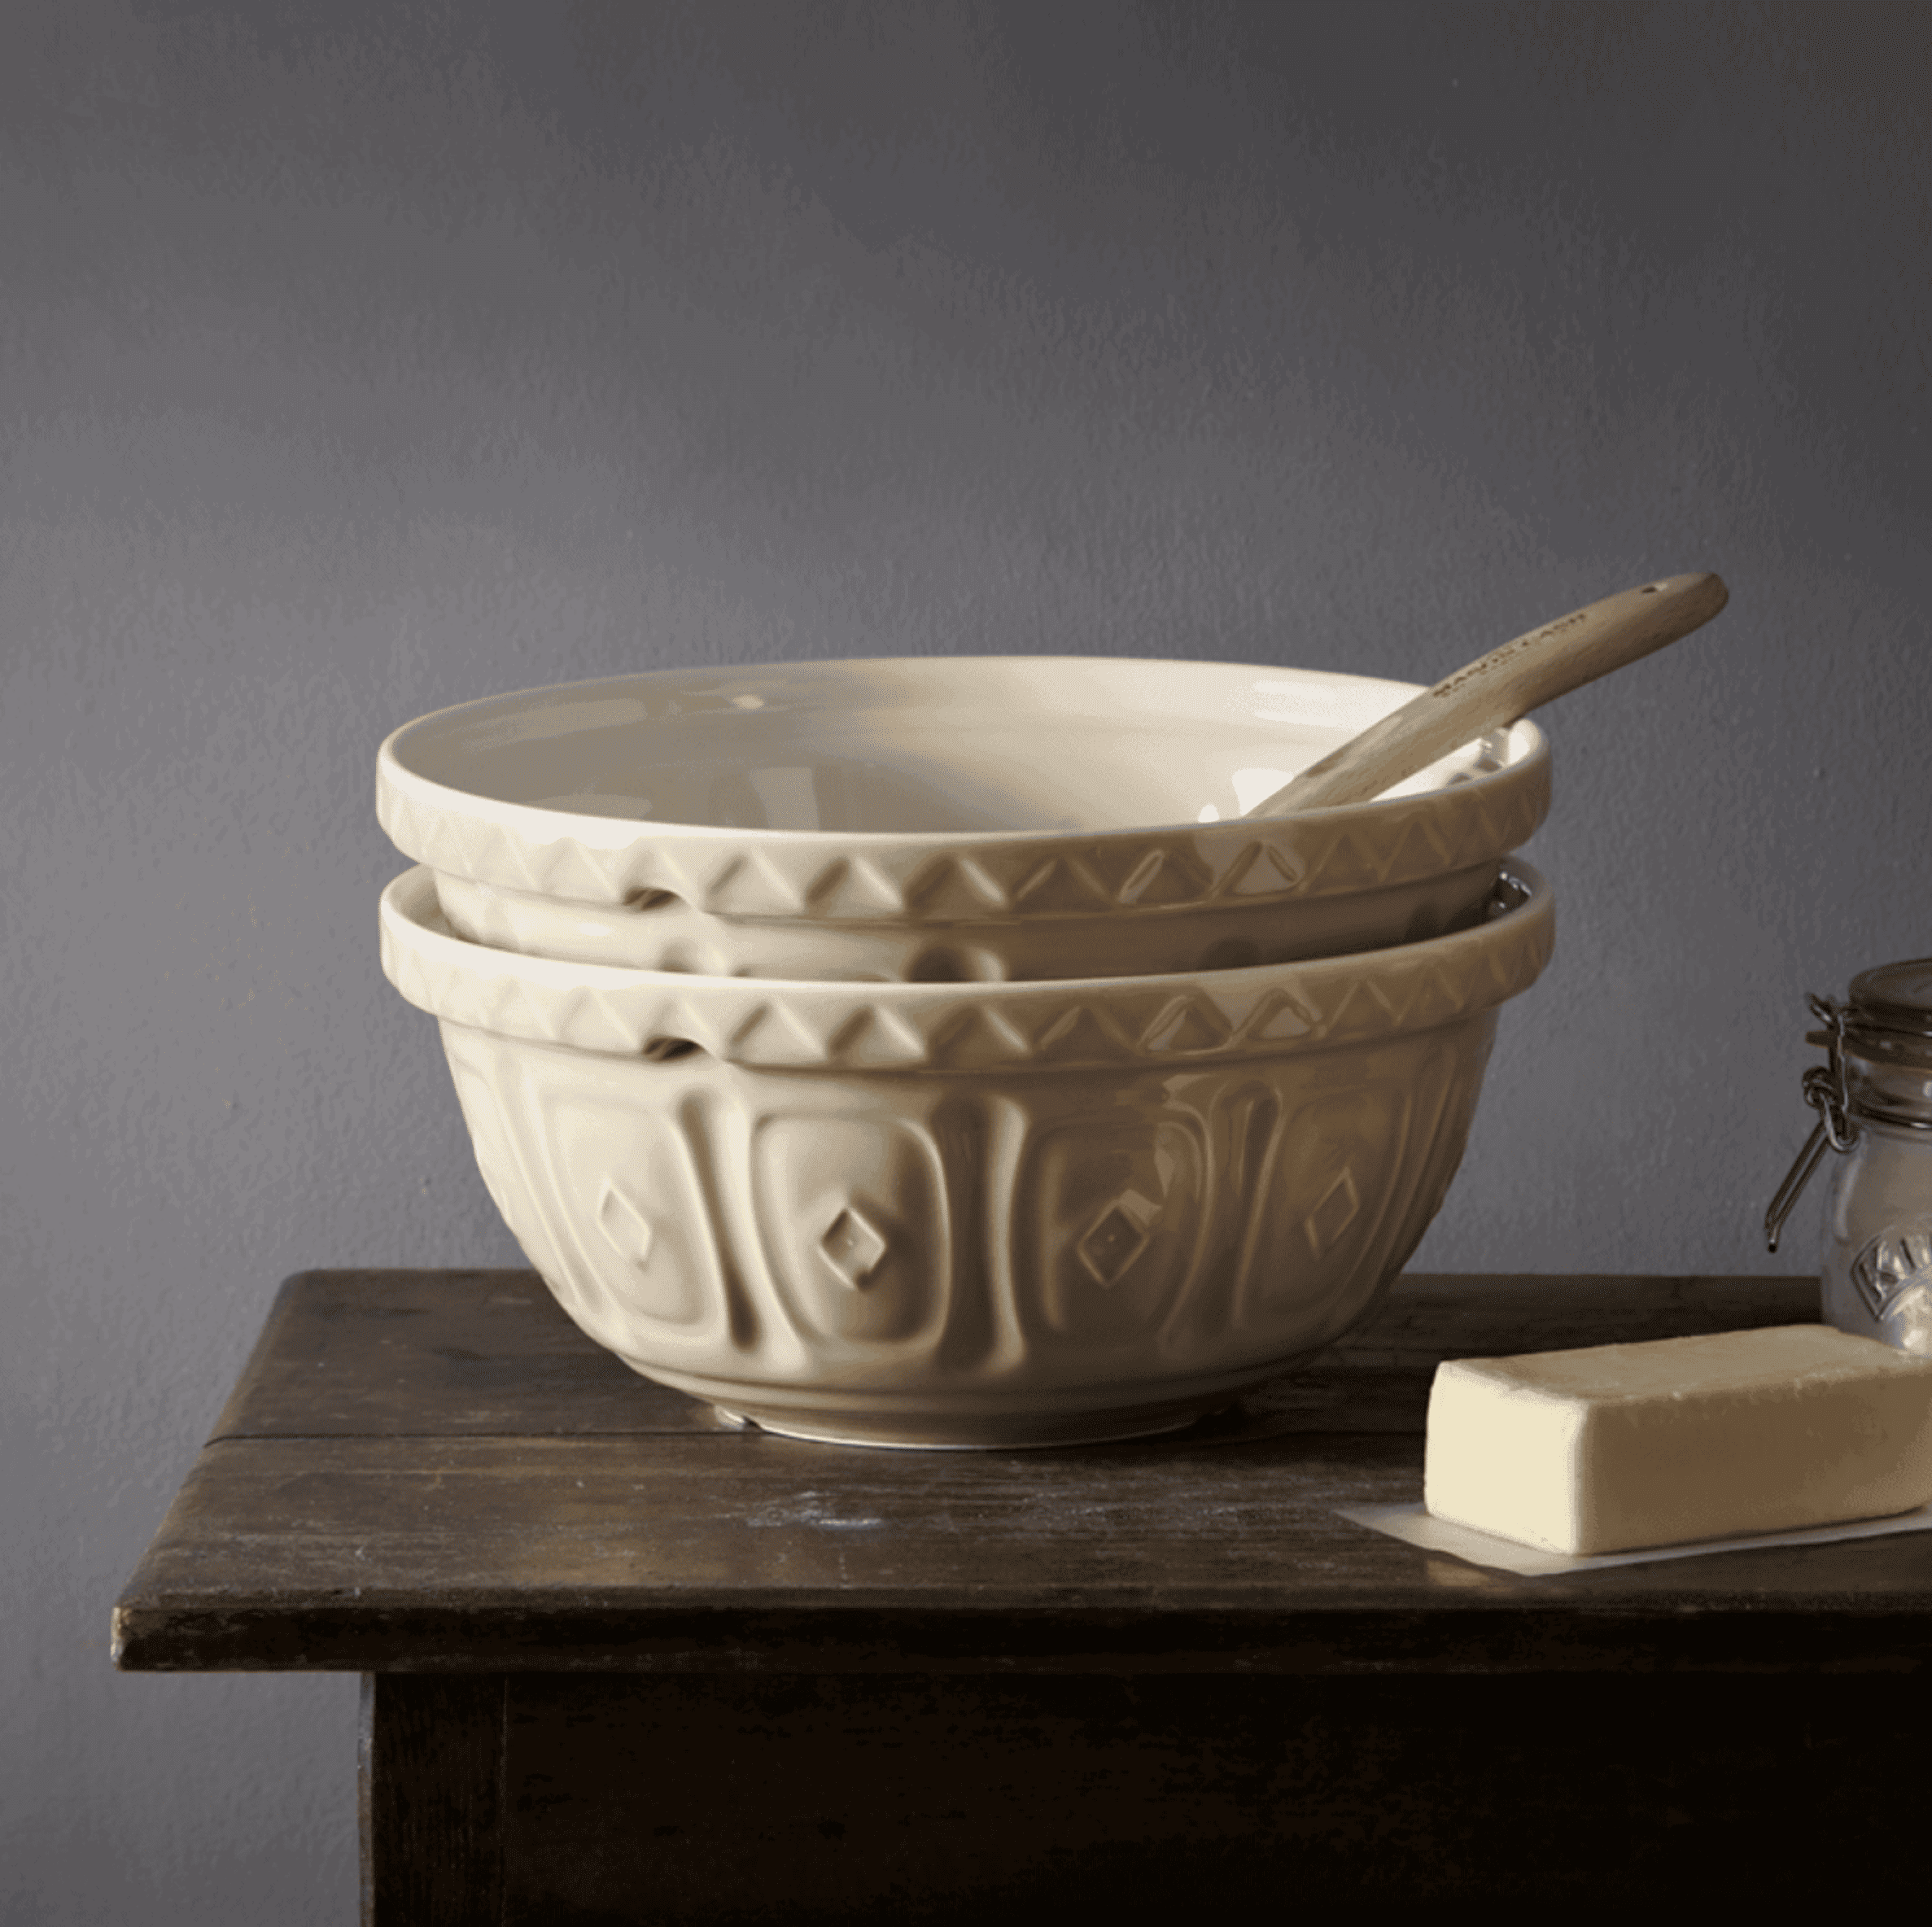 With a glossy cane finish and crisp white interior this mixing bowl oozes quintessential British style. Crafted from chip-resistant earthenware, this durable piece is perfect for making doughs, batters and pastries. 